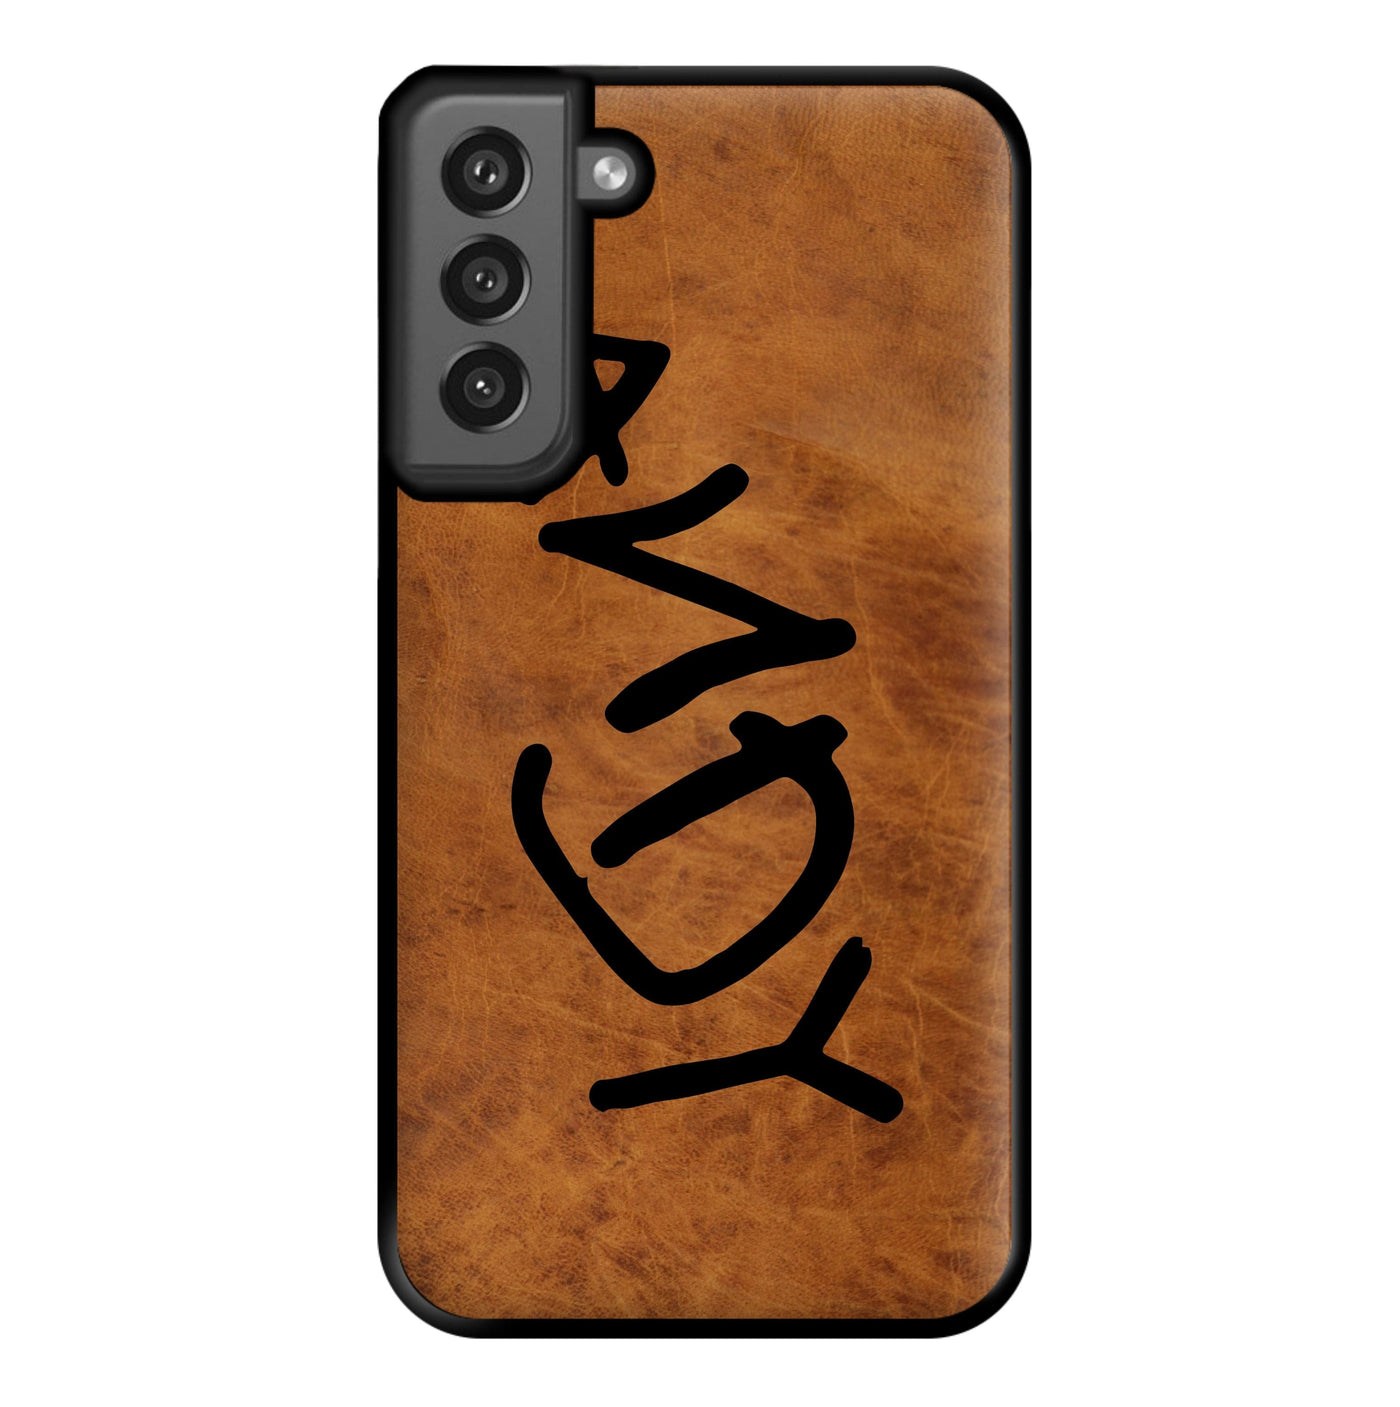 Andy Footprint - Toy Story Phone Case